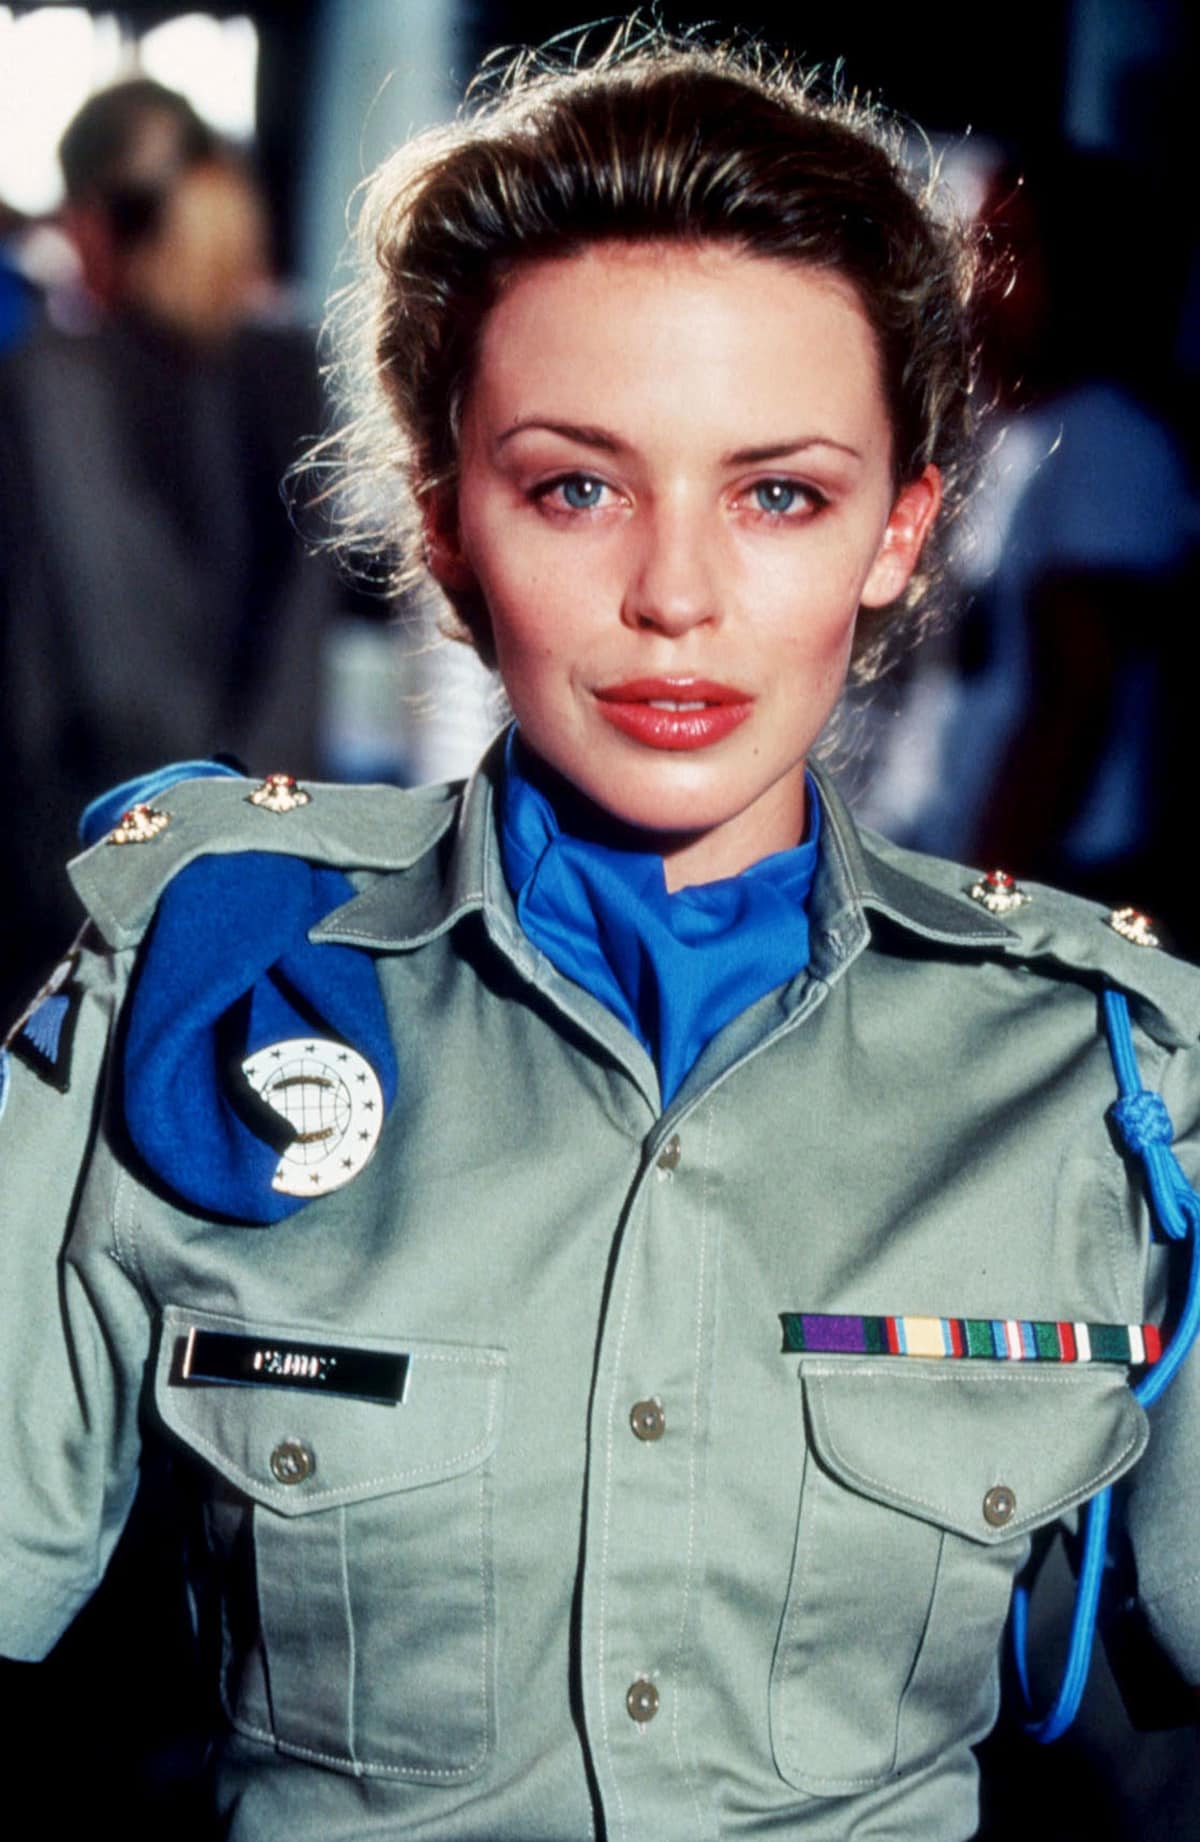 Kylie Minogue portrayed Cammy in the 1994 action film Street Fighter